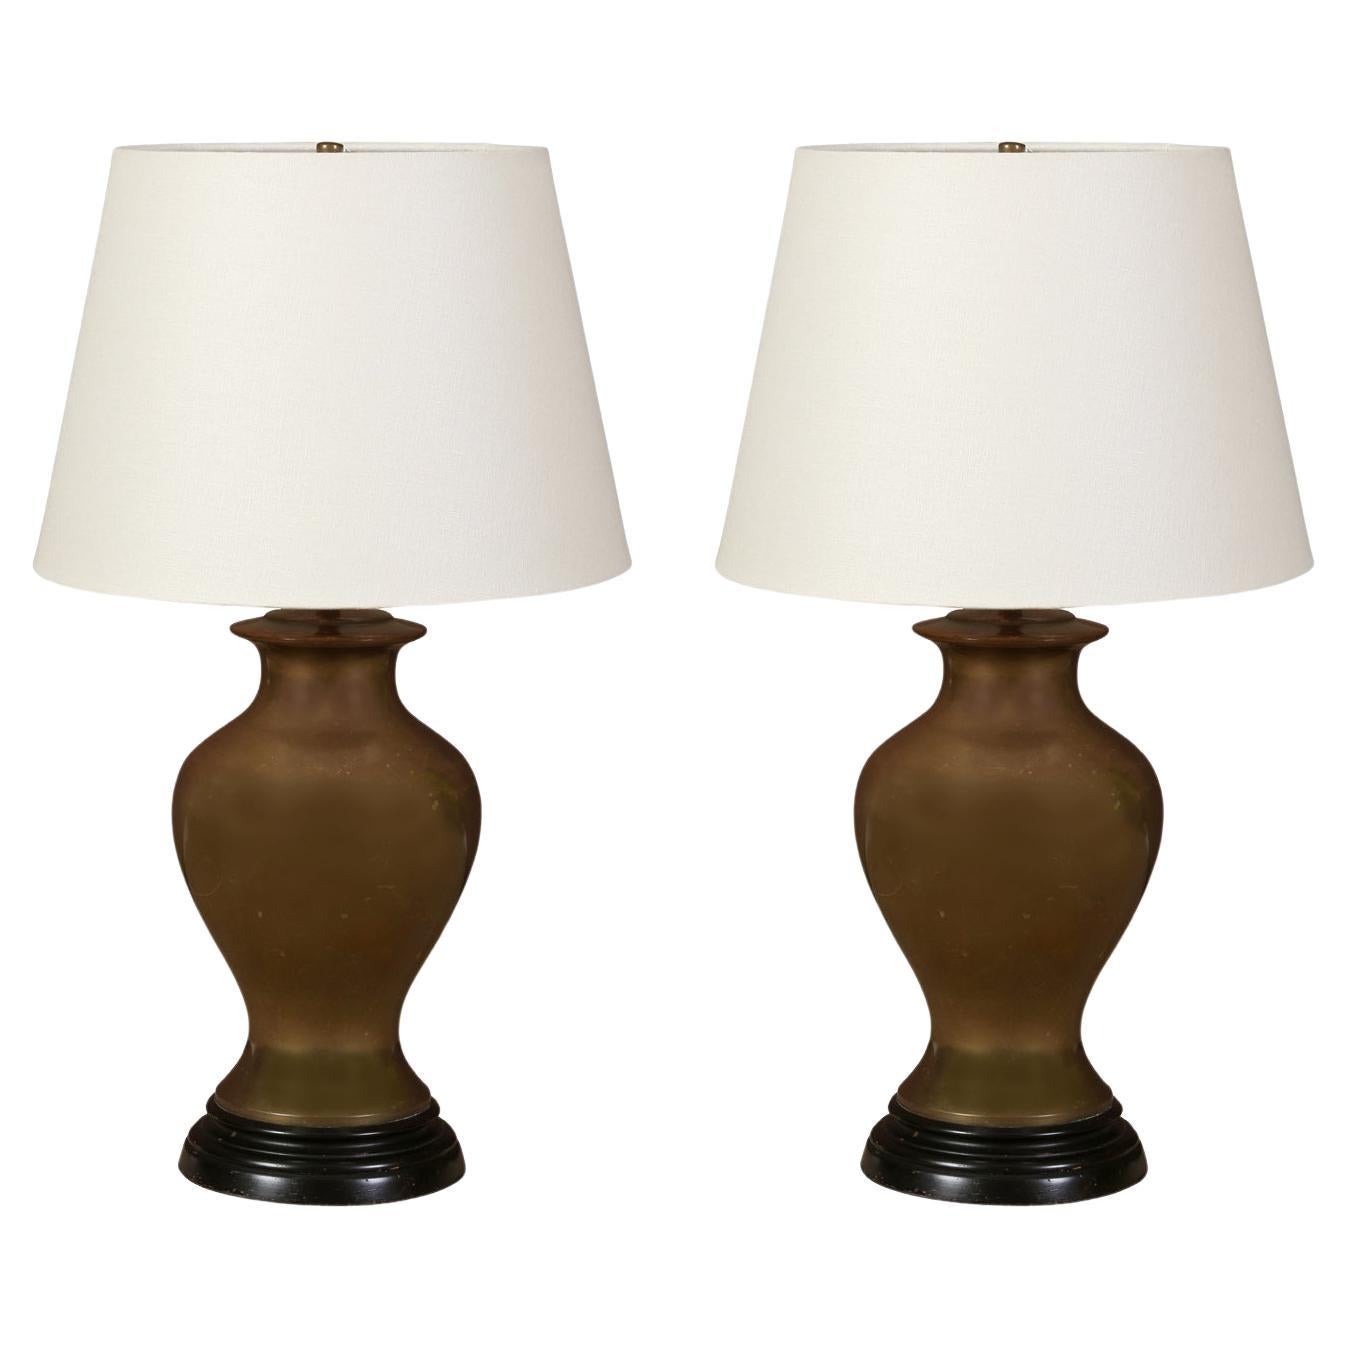 A Pair of Vintage Brass Lamps with Shades For Sale